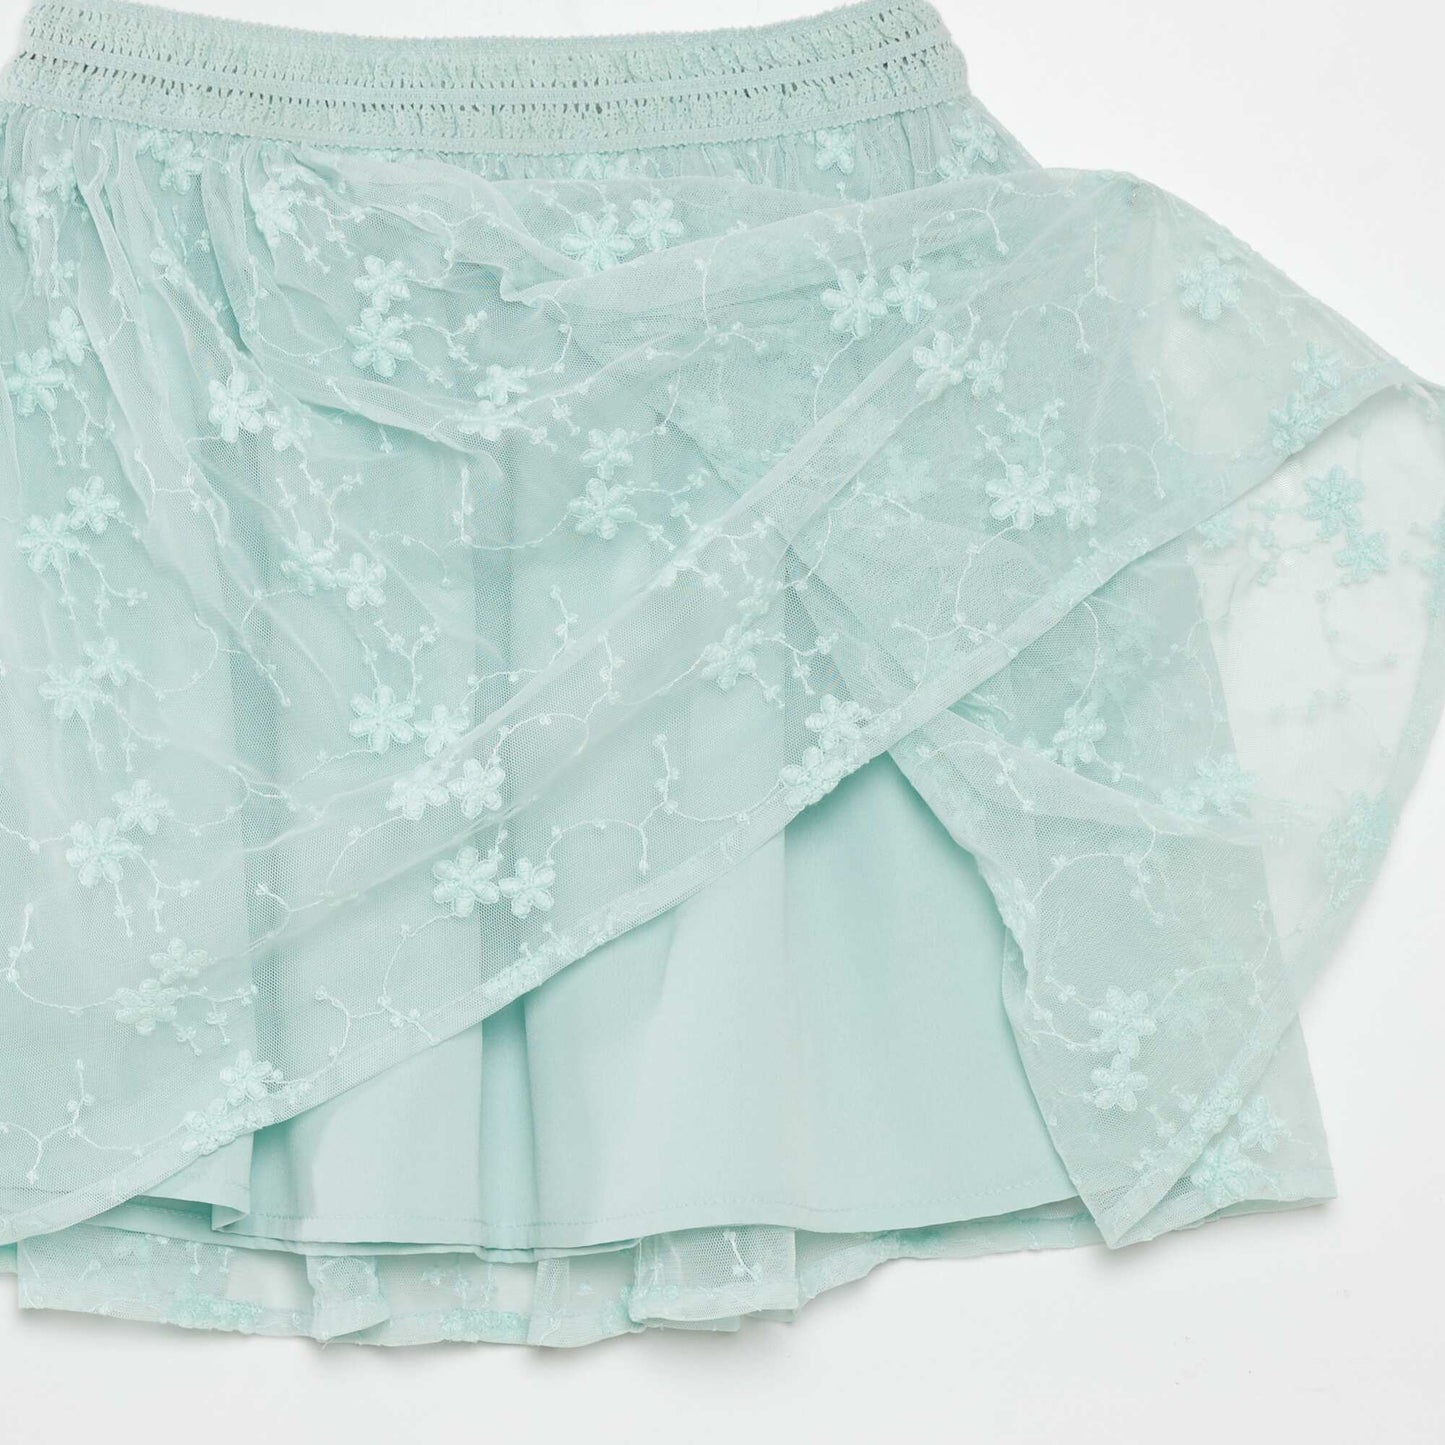 Embroidered tulle flared skirt BLUE